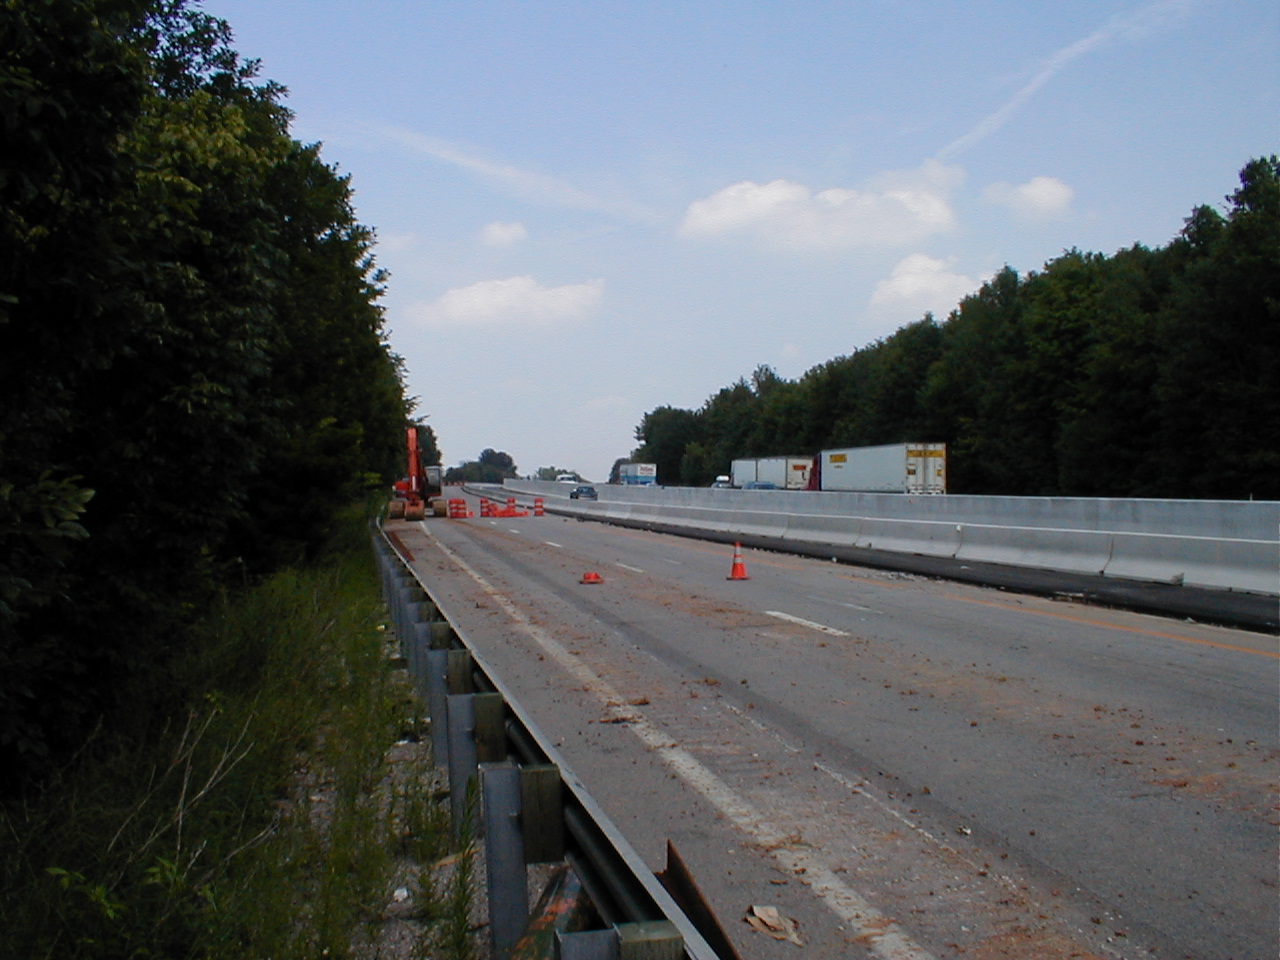 This shows the abandoned south bound lanes, the temporary south bound lanes which are divided by a Jersey barricade, and the north bound lanes.